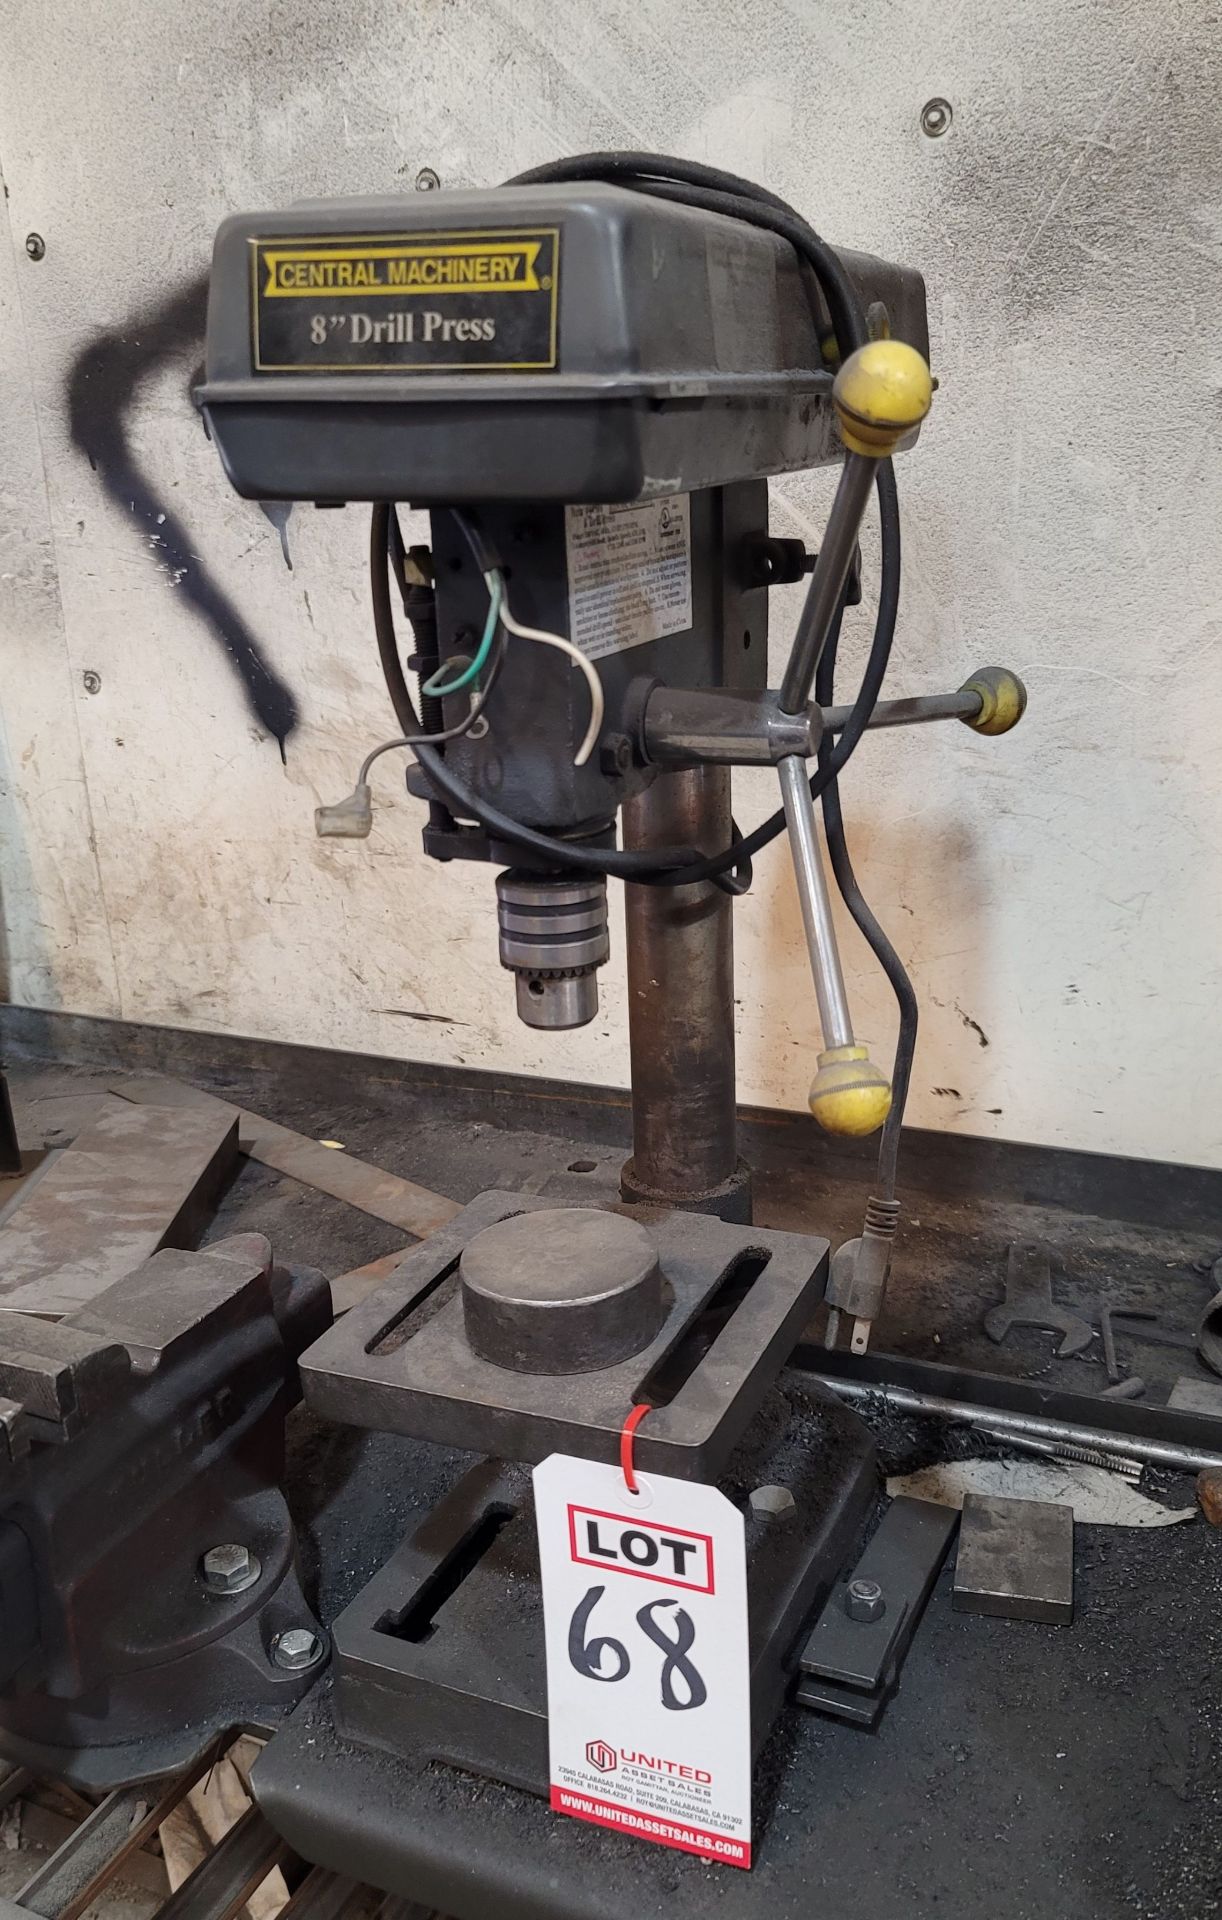 CENTRAL MACHINERY 8" BENCHTOP DRILL PRESS